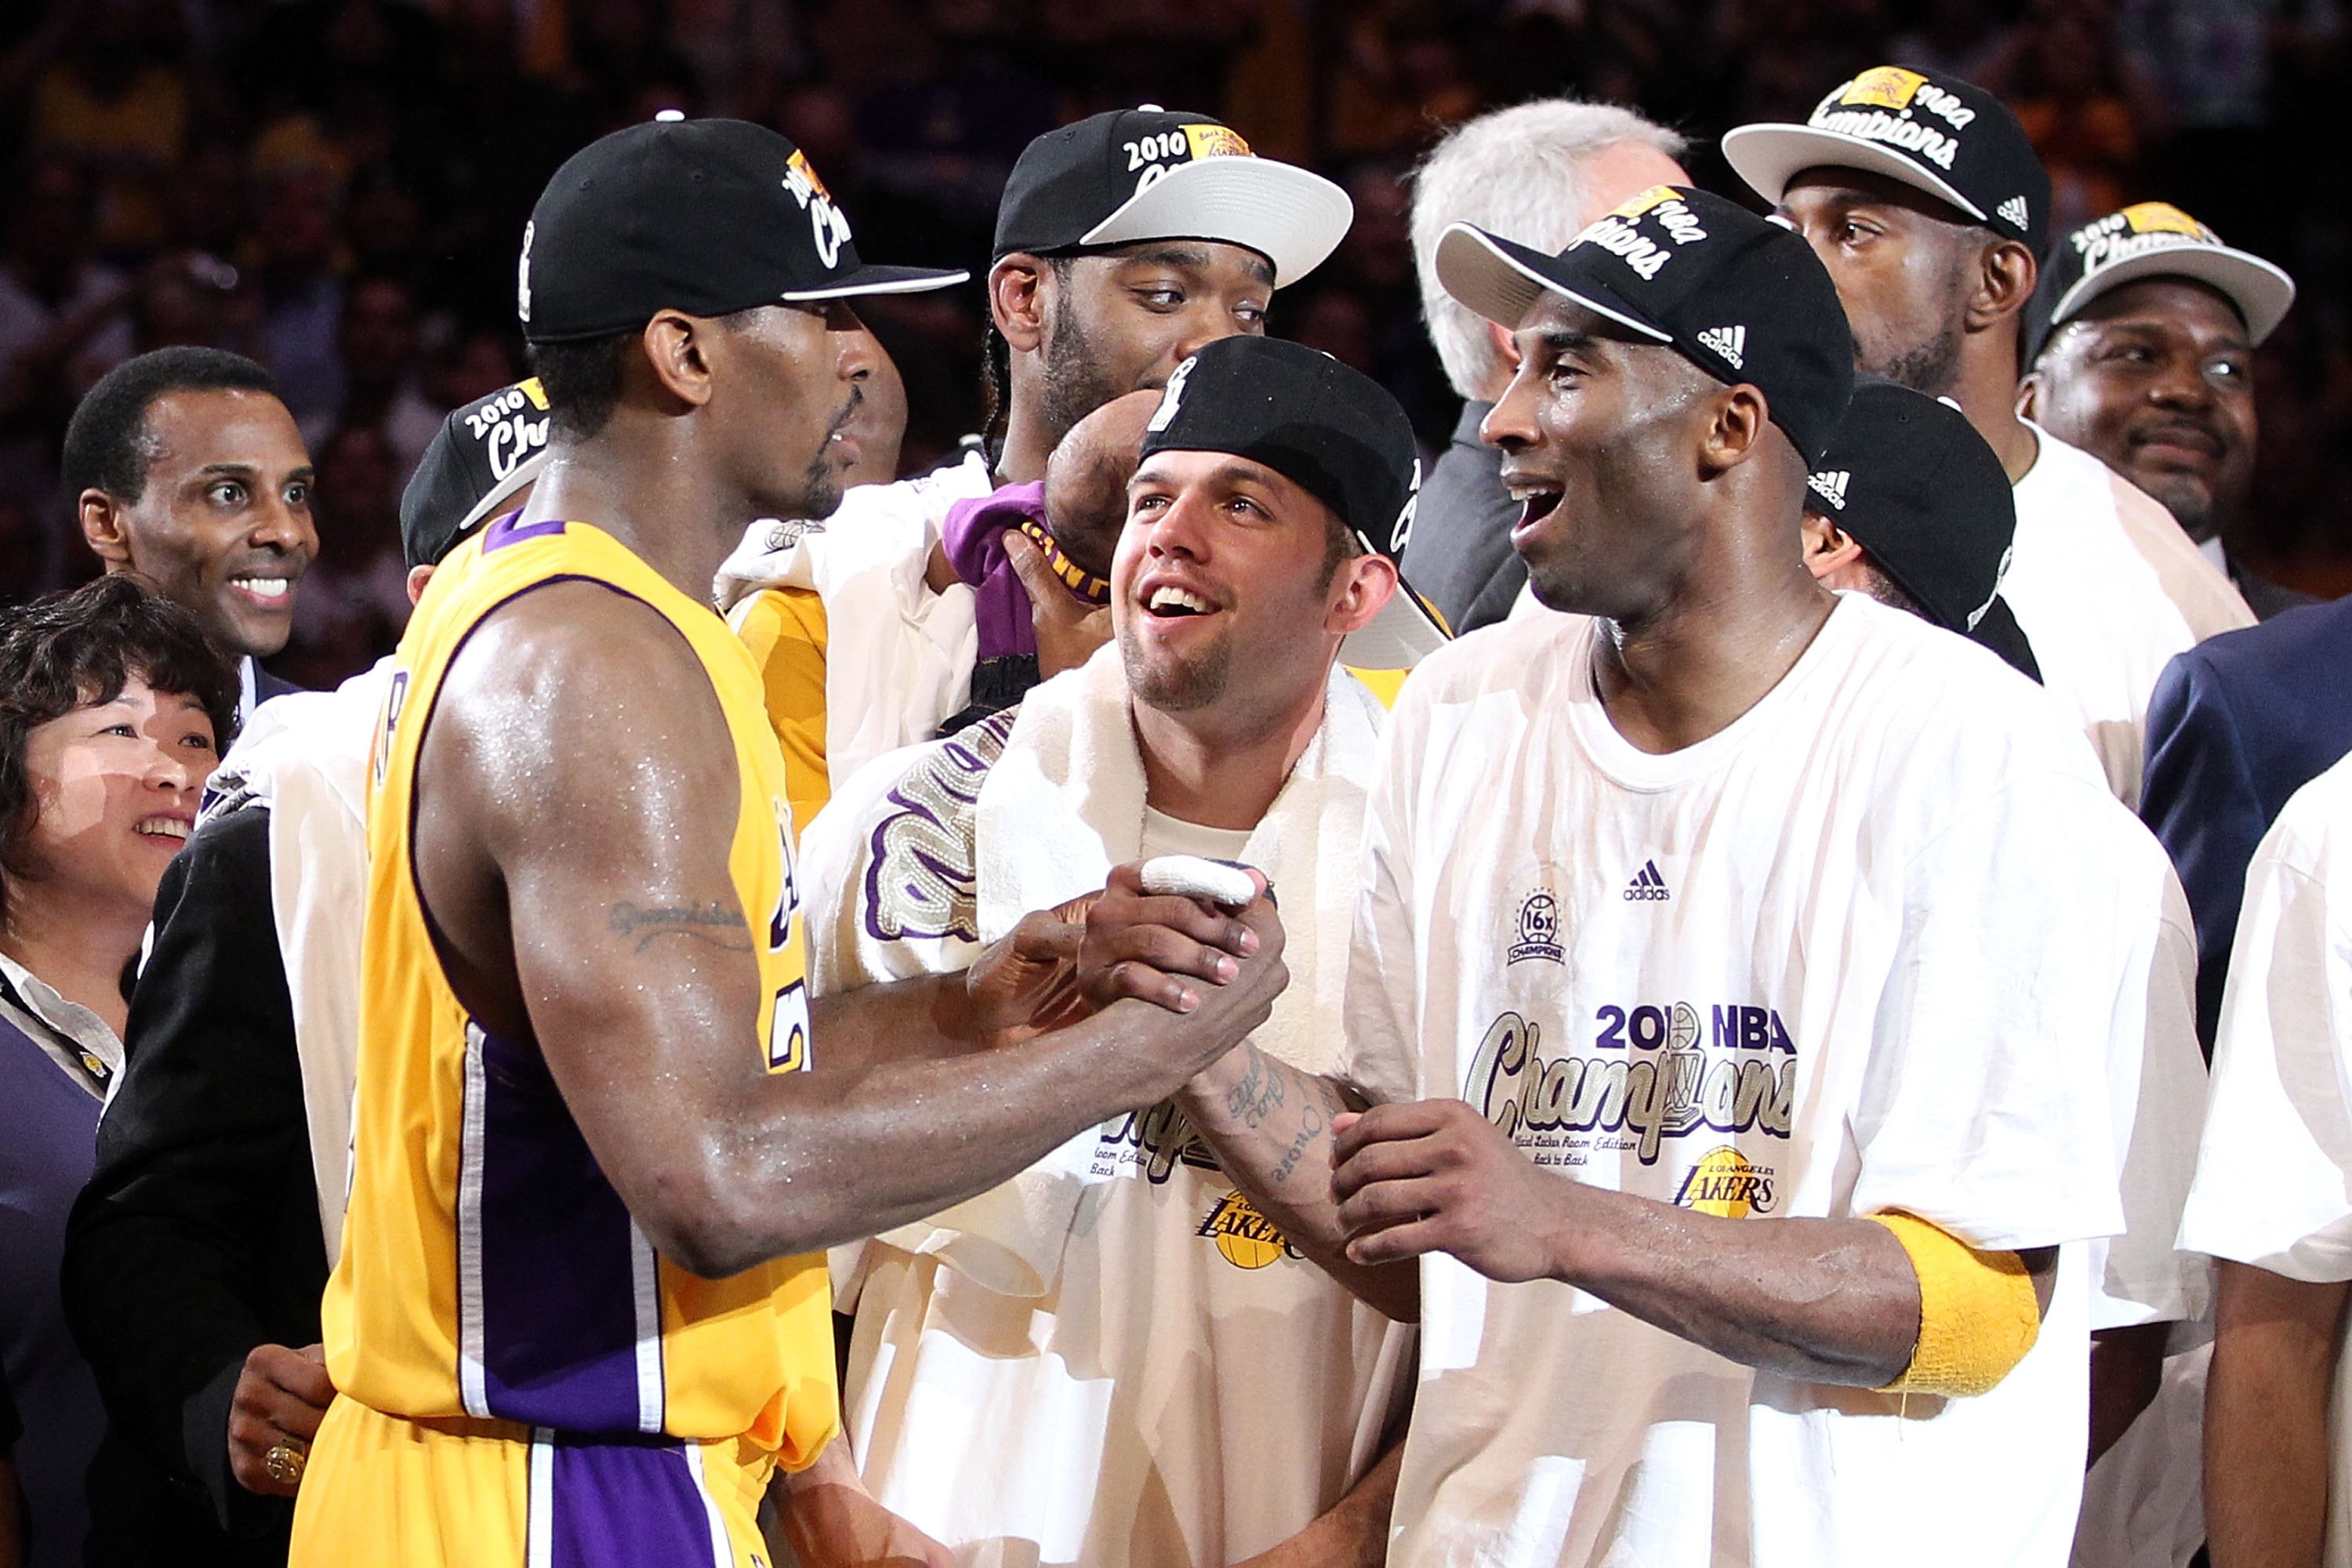 LOS ANGELES, CA - JUNE 17:  Ron Artest #37, Jordan Farmar #1 and Kobe Bryant #24 of the Los Angeles Lakers celebrate after the Lakers defeated the Boston Celtics in Game Seven of the 2010 NBA Finals at Staples Center on June 17, 2010 in Los Angeles, Calif